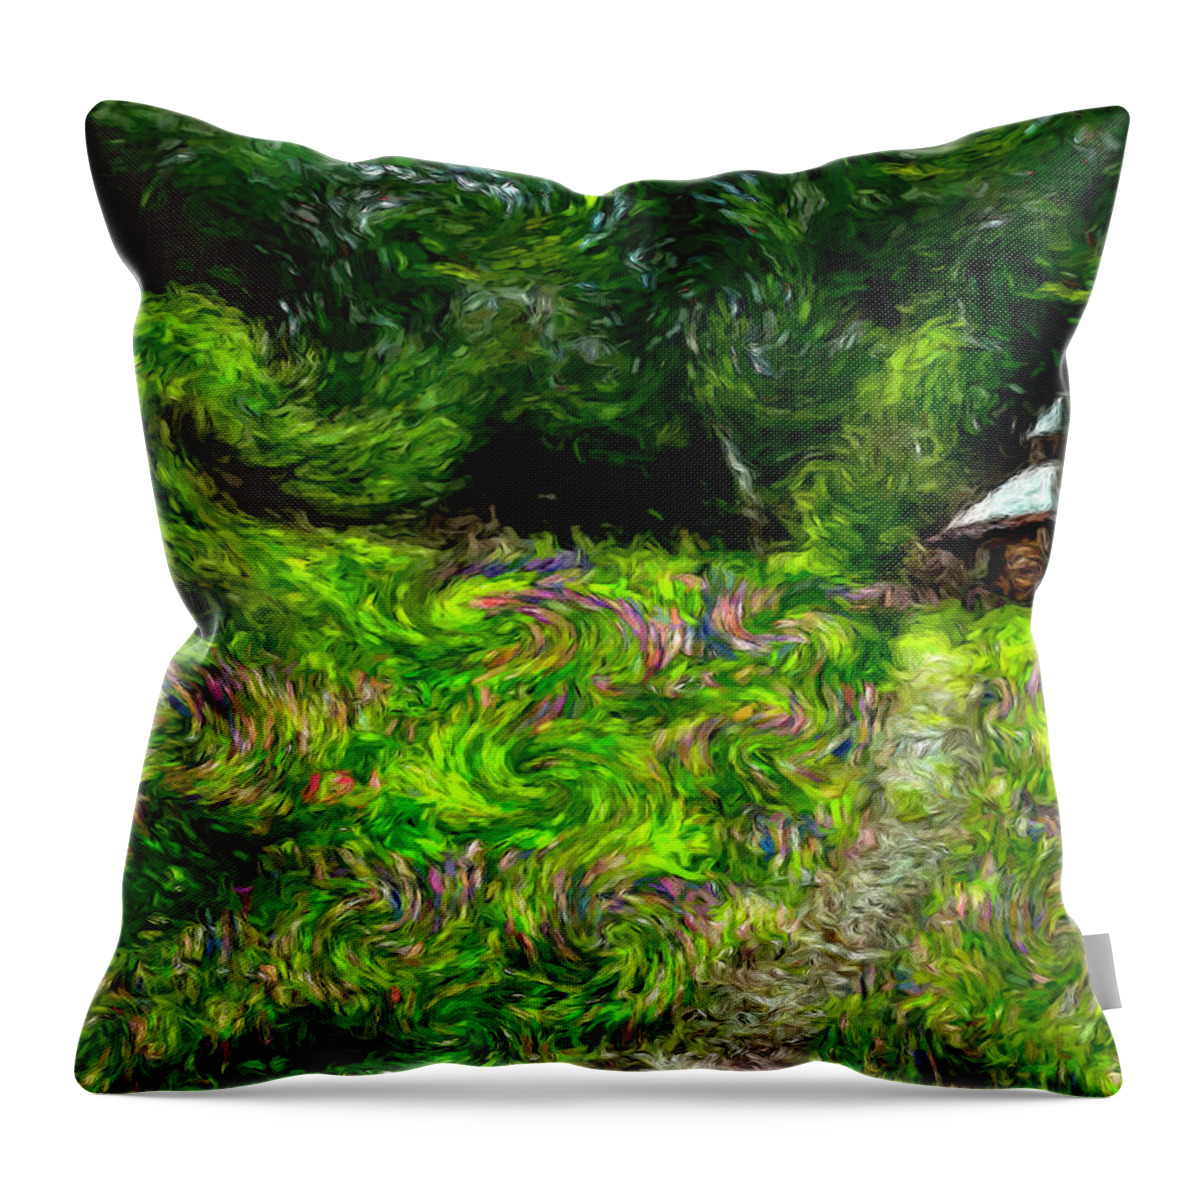 Lupinefest Throw Pillow featuring the photograph Vincents Swirling Mind by Wayne King